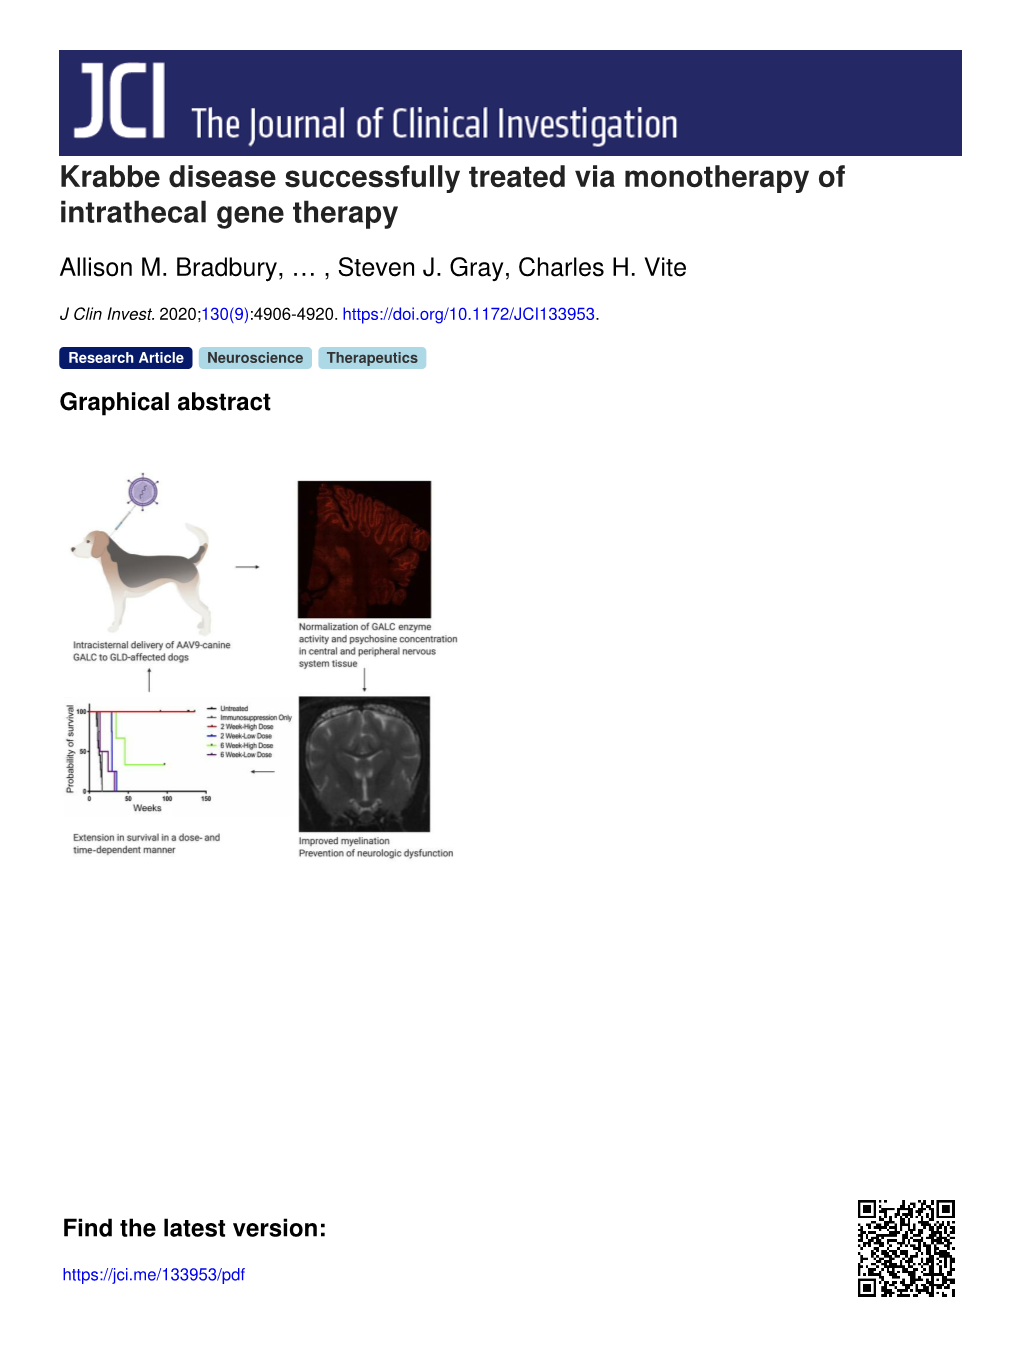 Krabbe Disease Successfully Treated Via Monotherapy of Intrathecal Gene Therapy